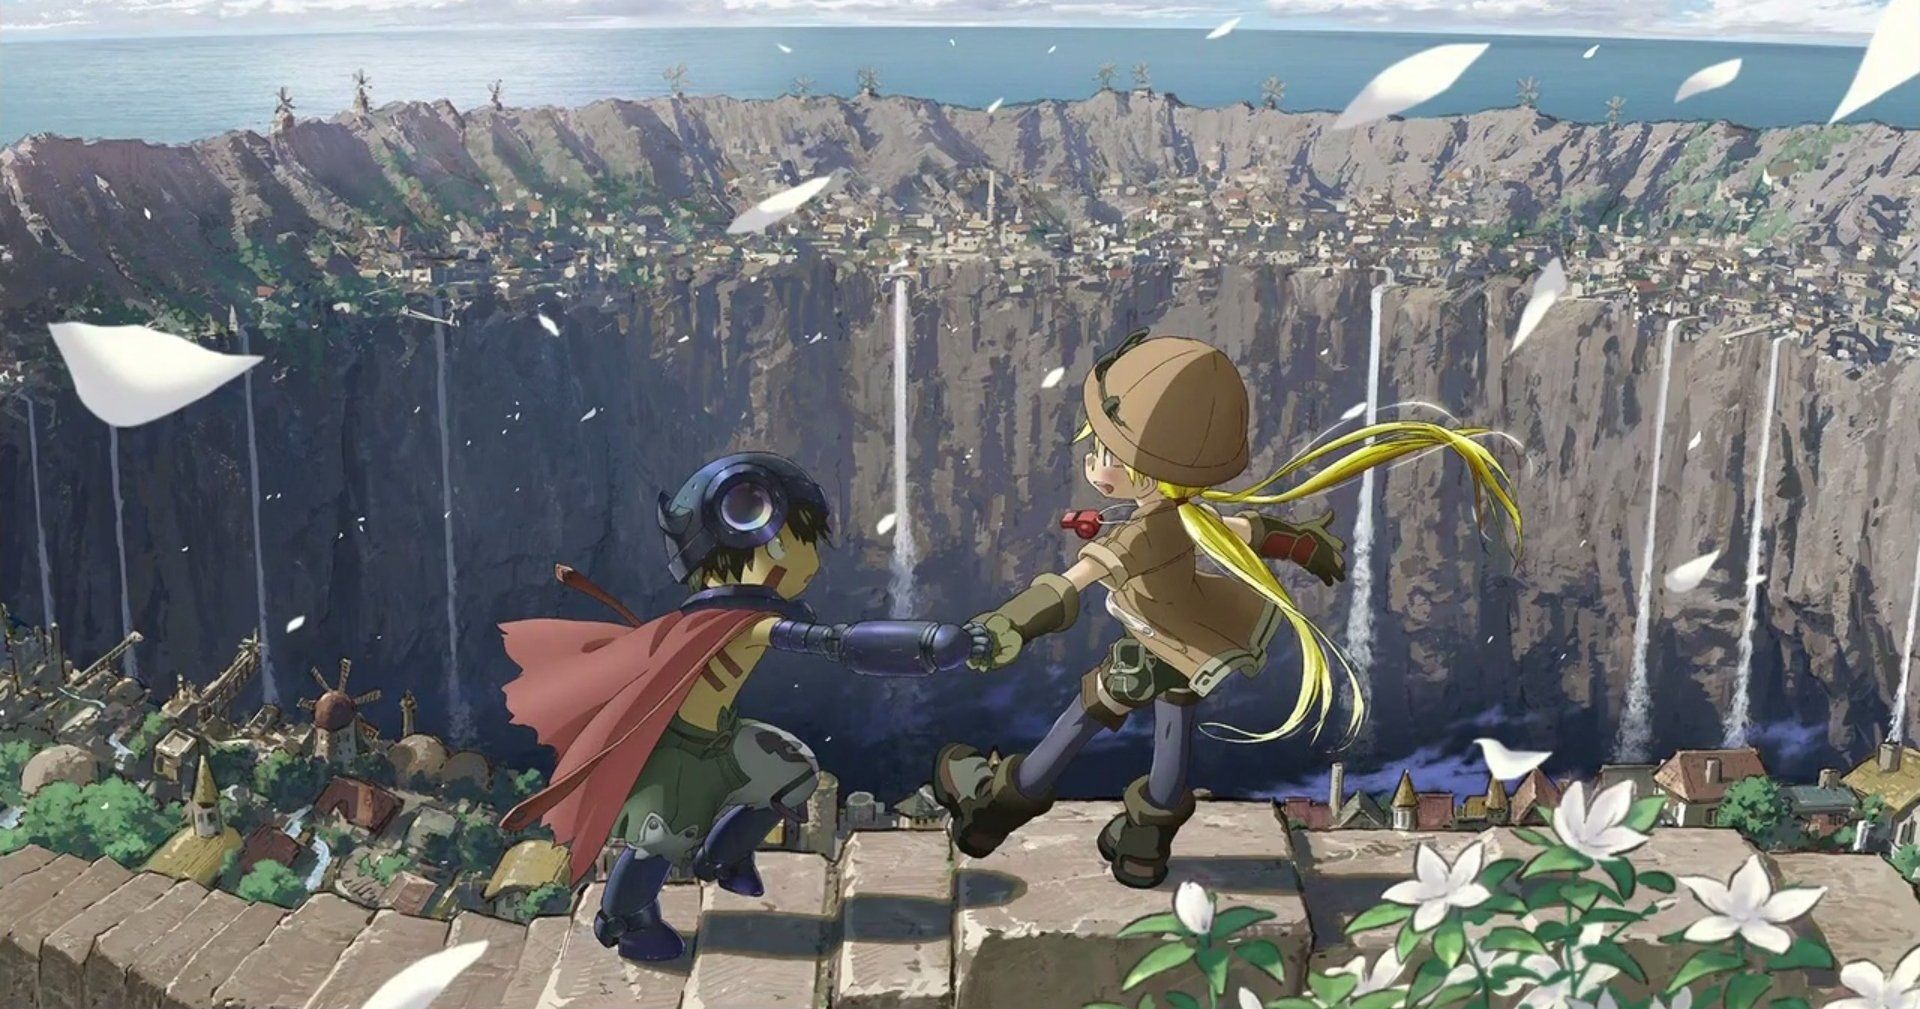 Made in Abyss Season 2 Gets New Trailer, Release Date